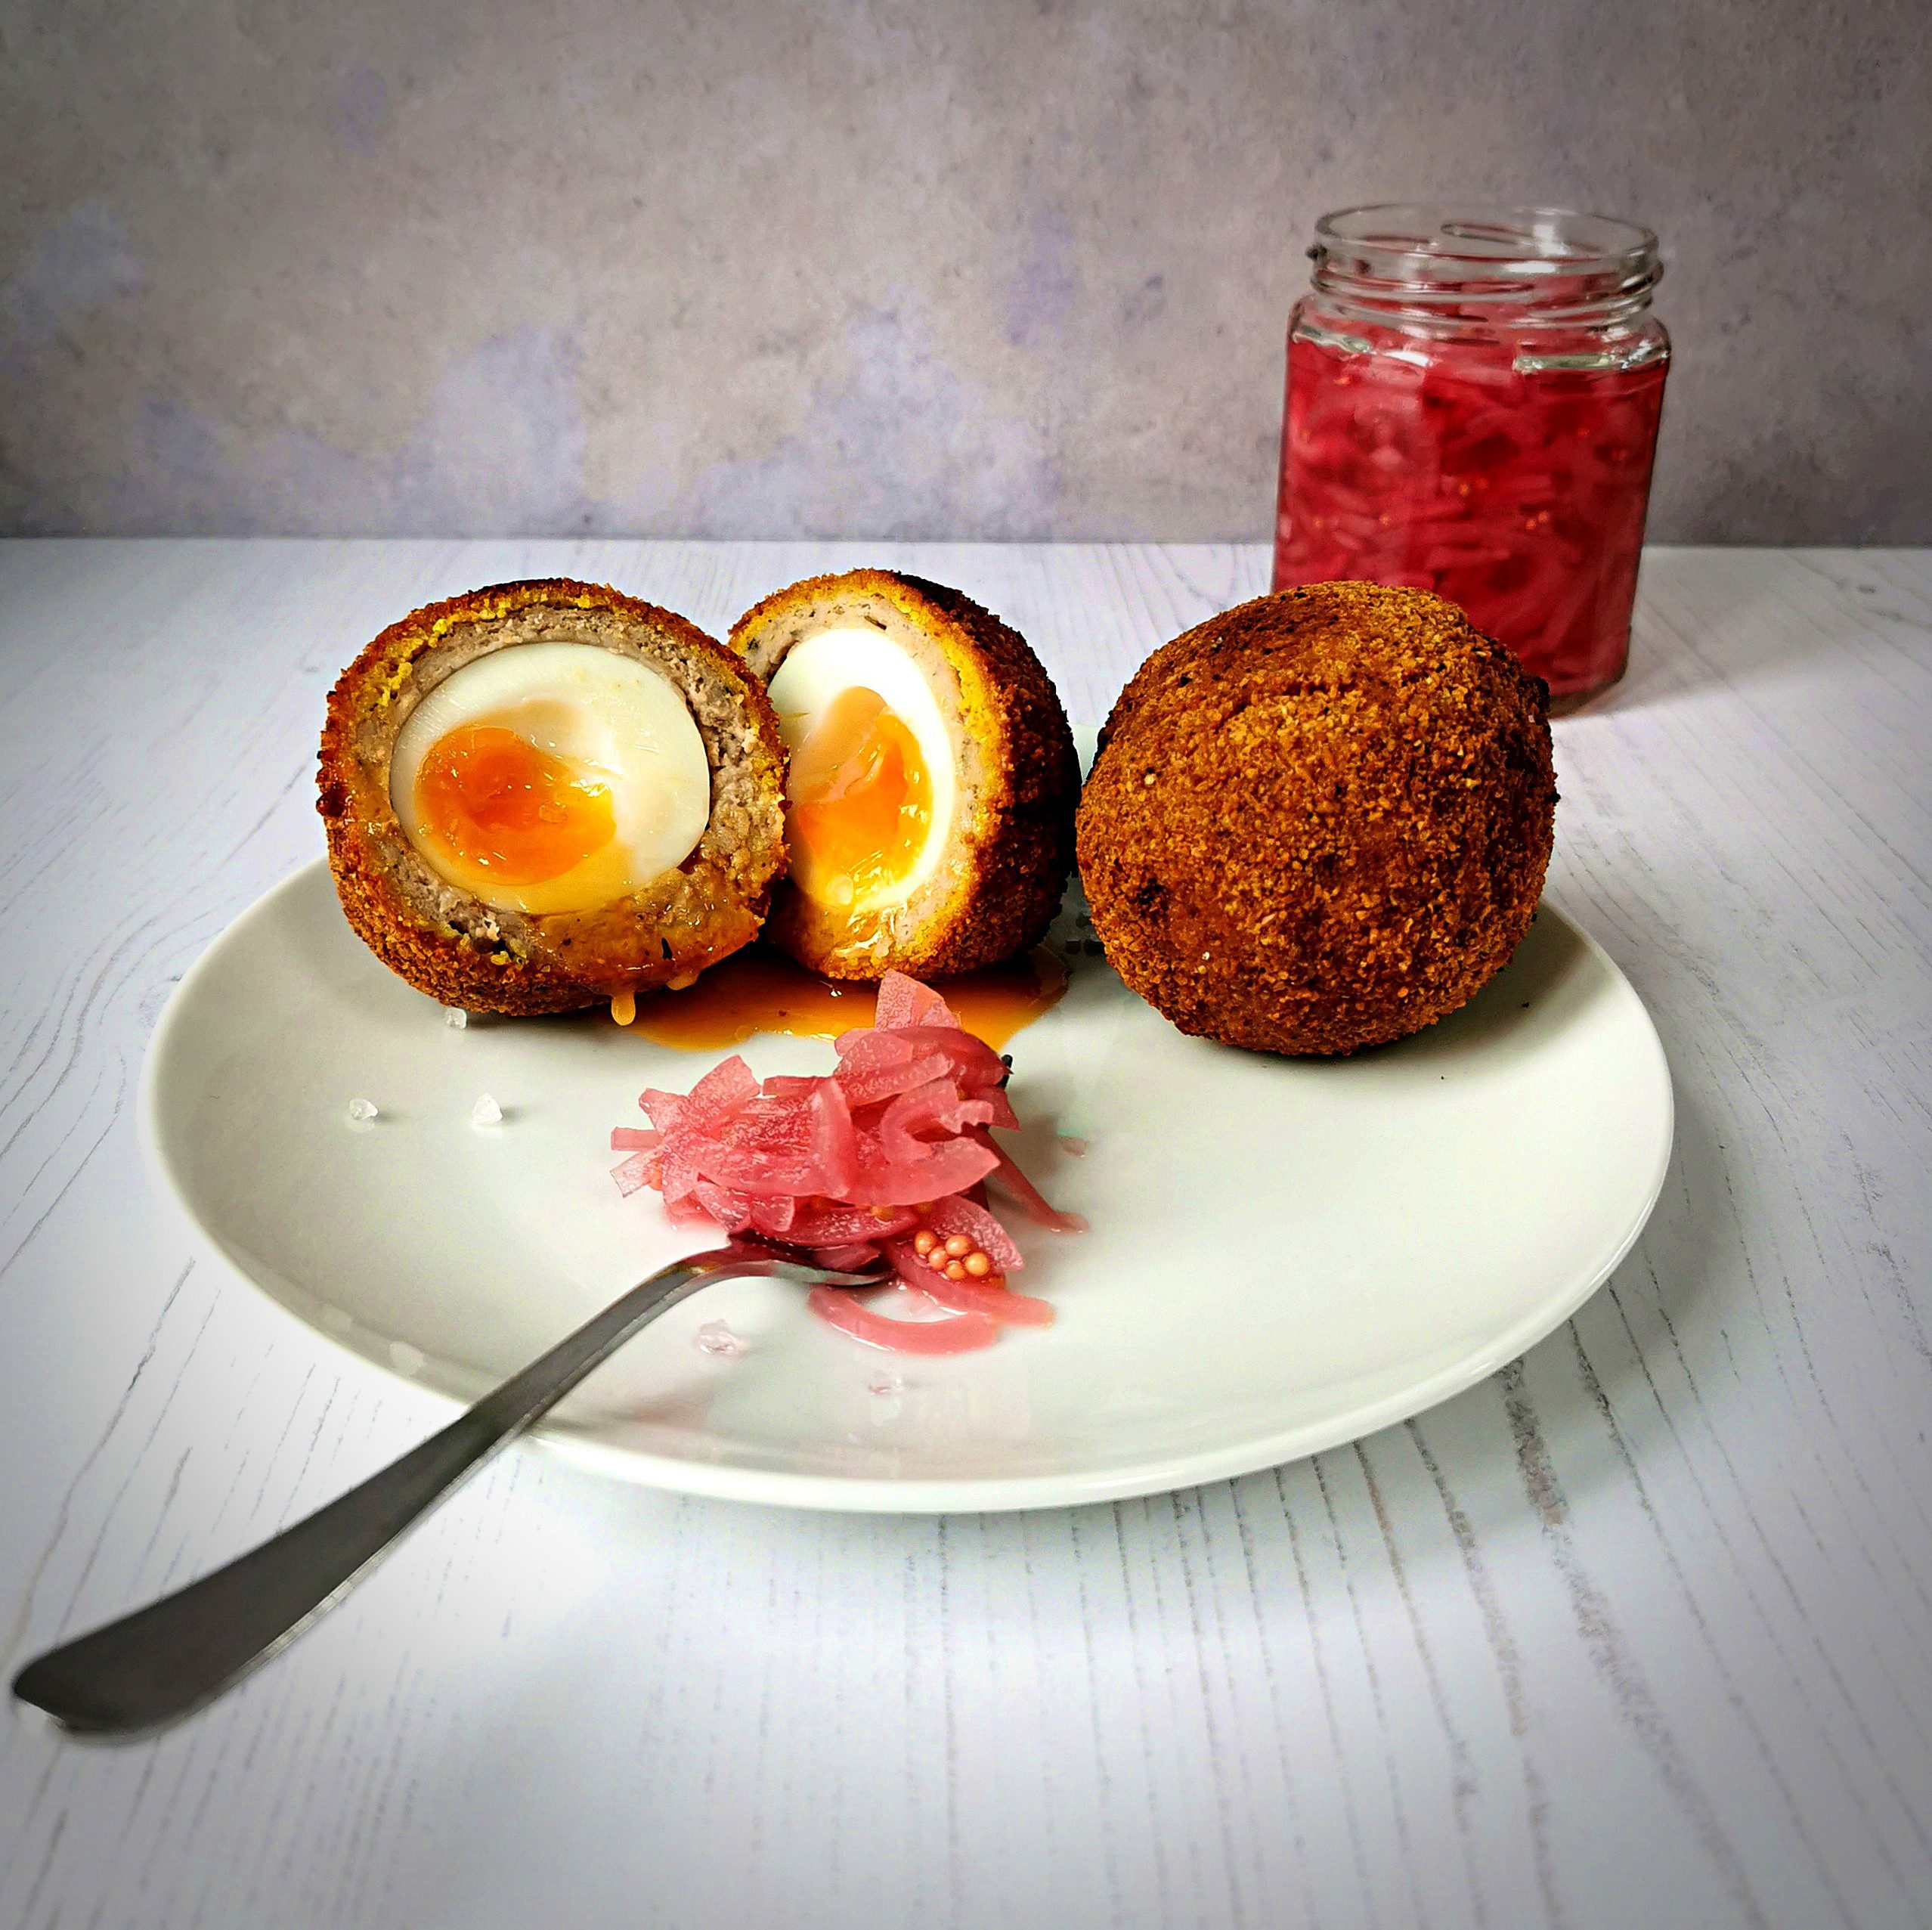 Read more about the article The ultimate runny yolk low carb scotch egg